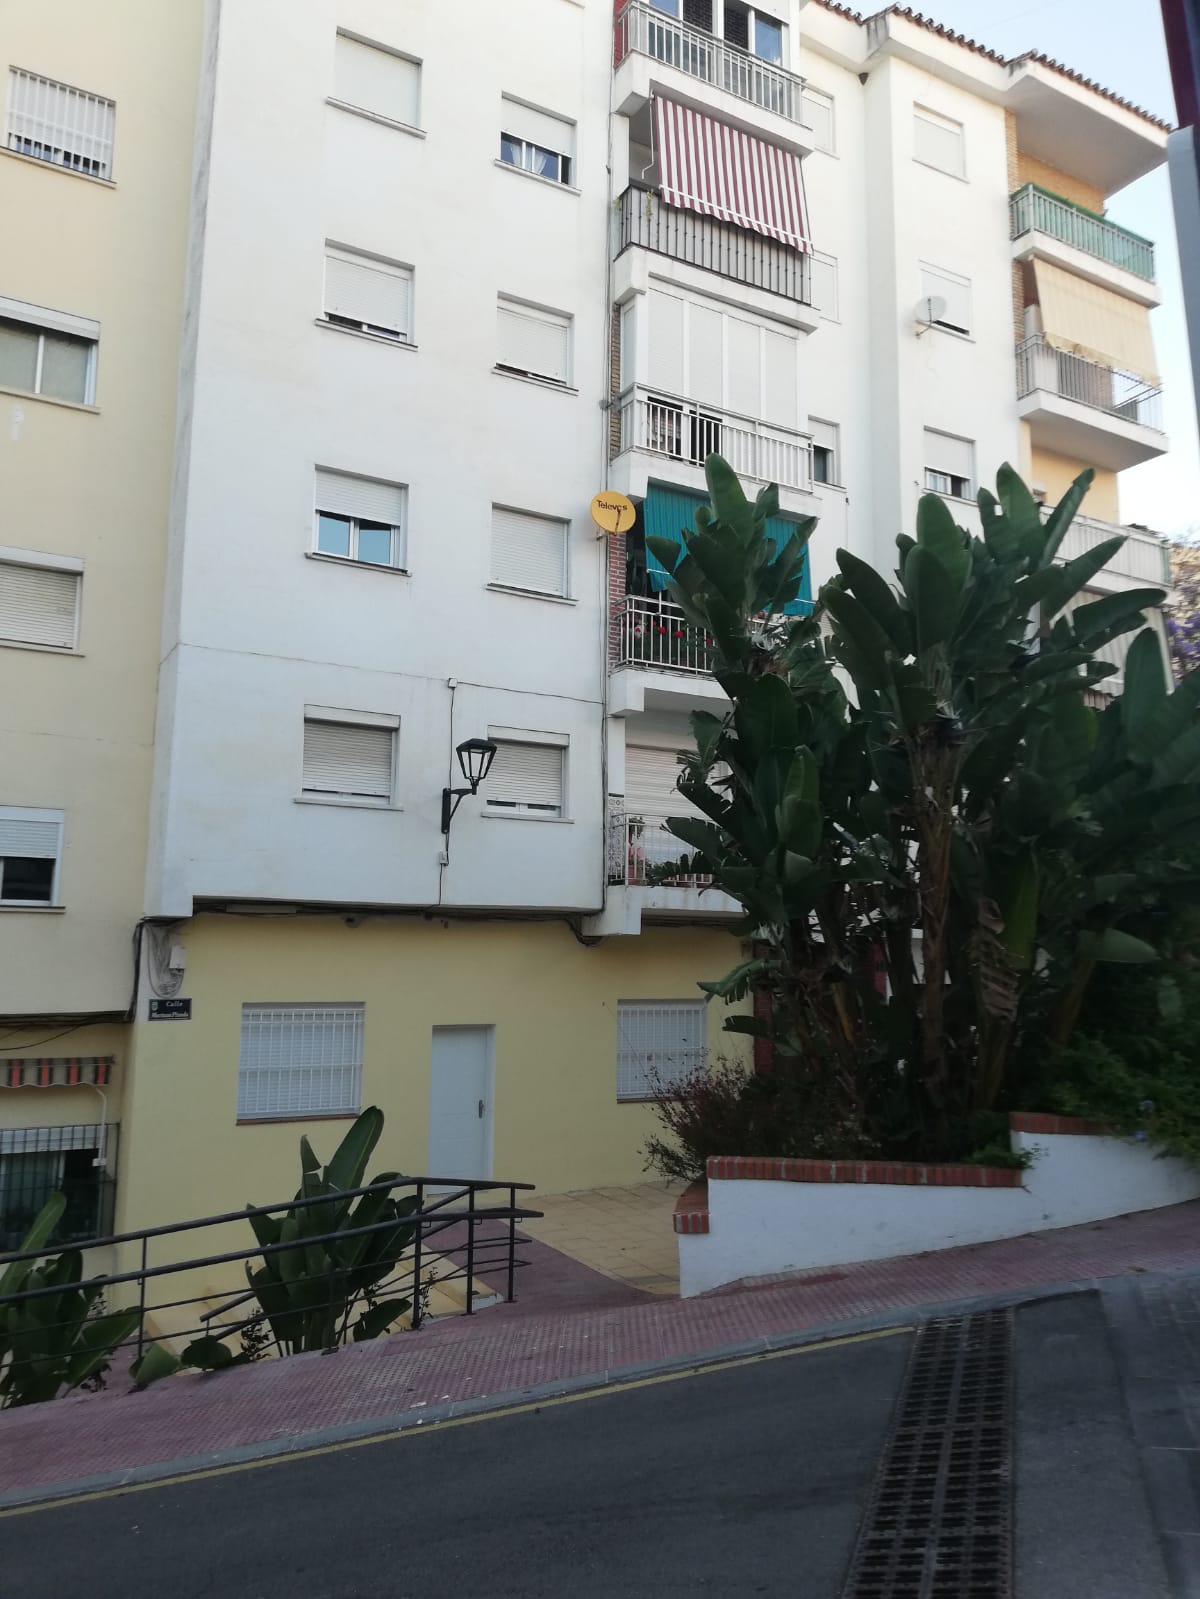 3 bedroom apartment for sale in the center of Estepona 300 meters from the sea - mibgroup.es